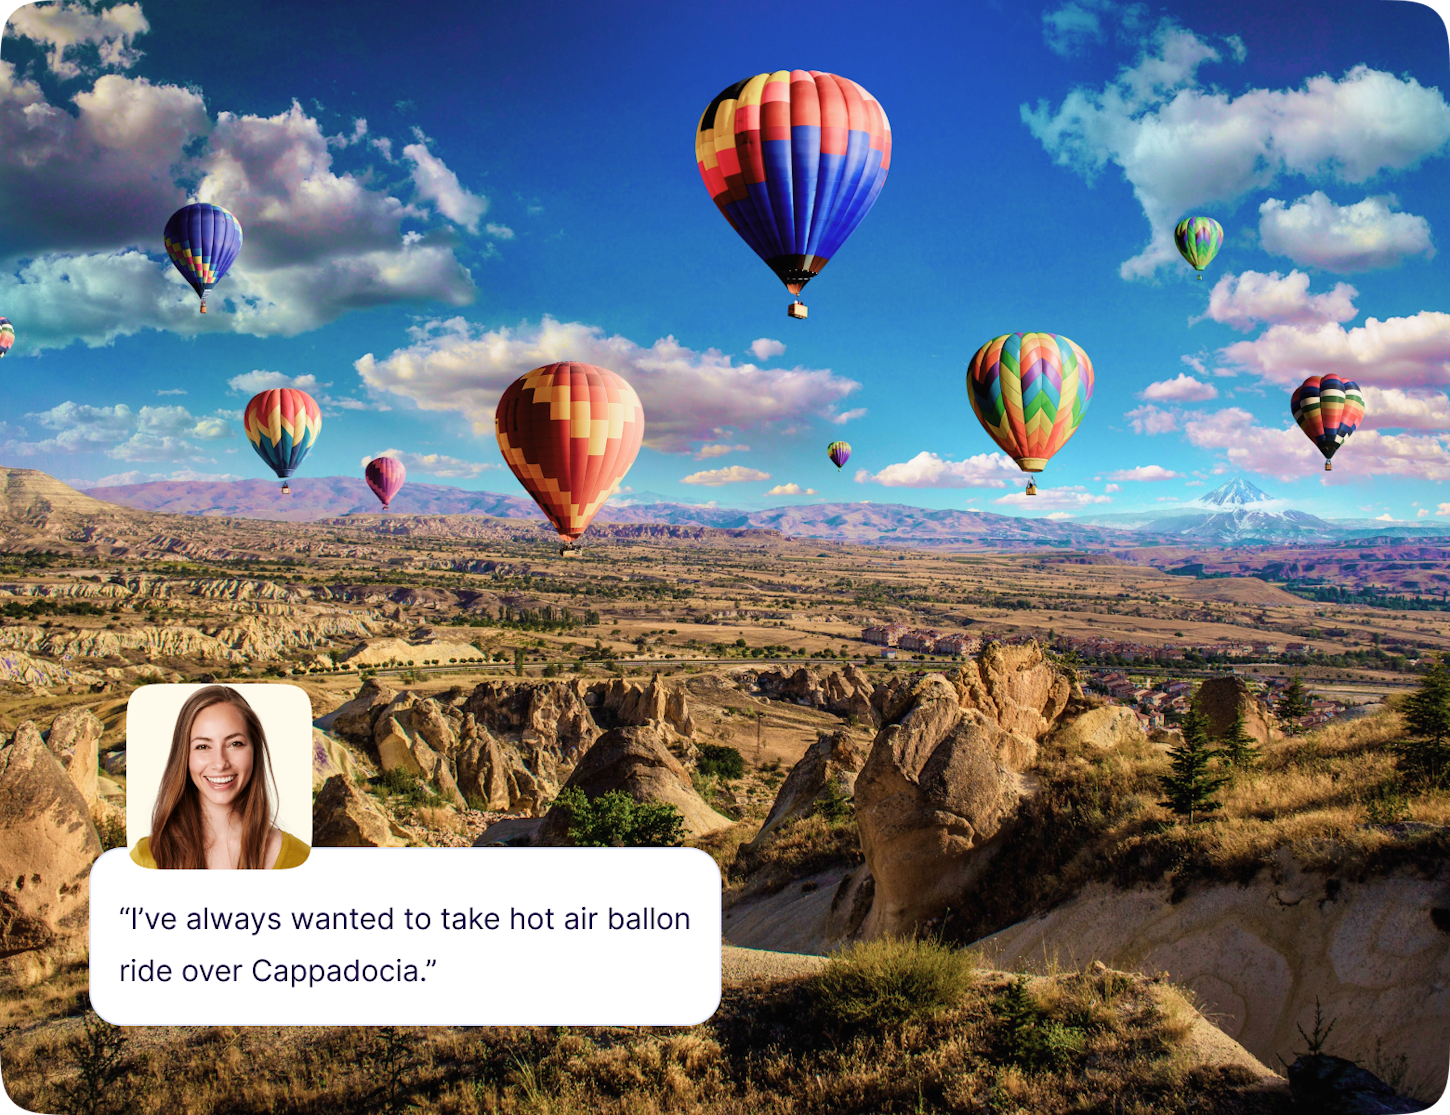 I've always to take hot air balloon ride over the Serengeti